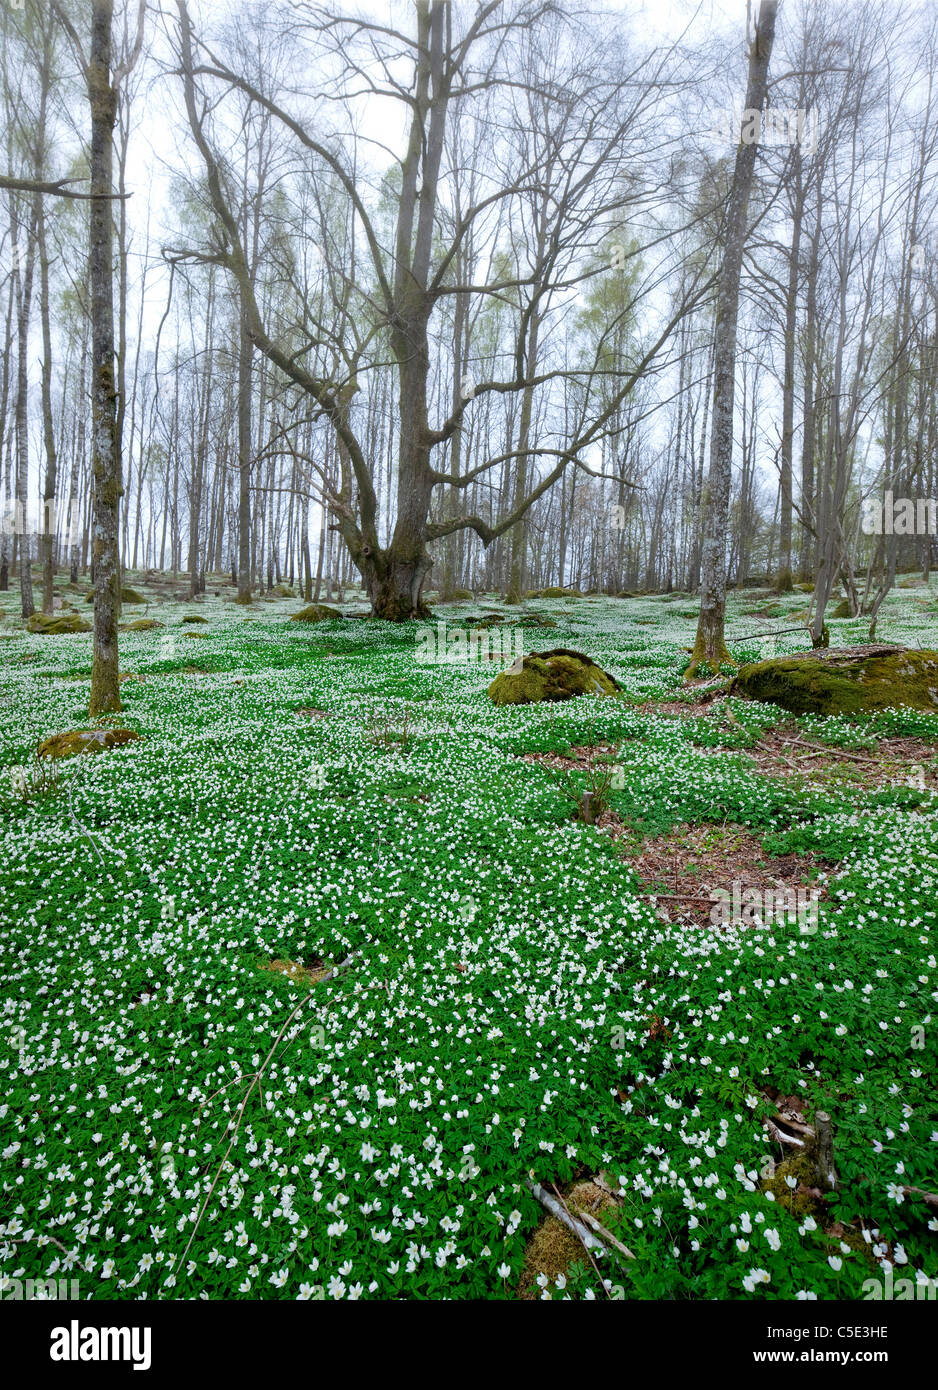 Anemones in the woods with trees in the background Stock Photo